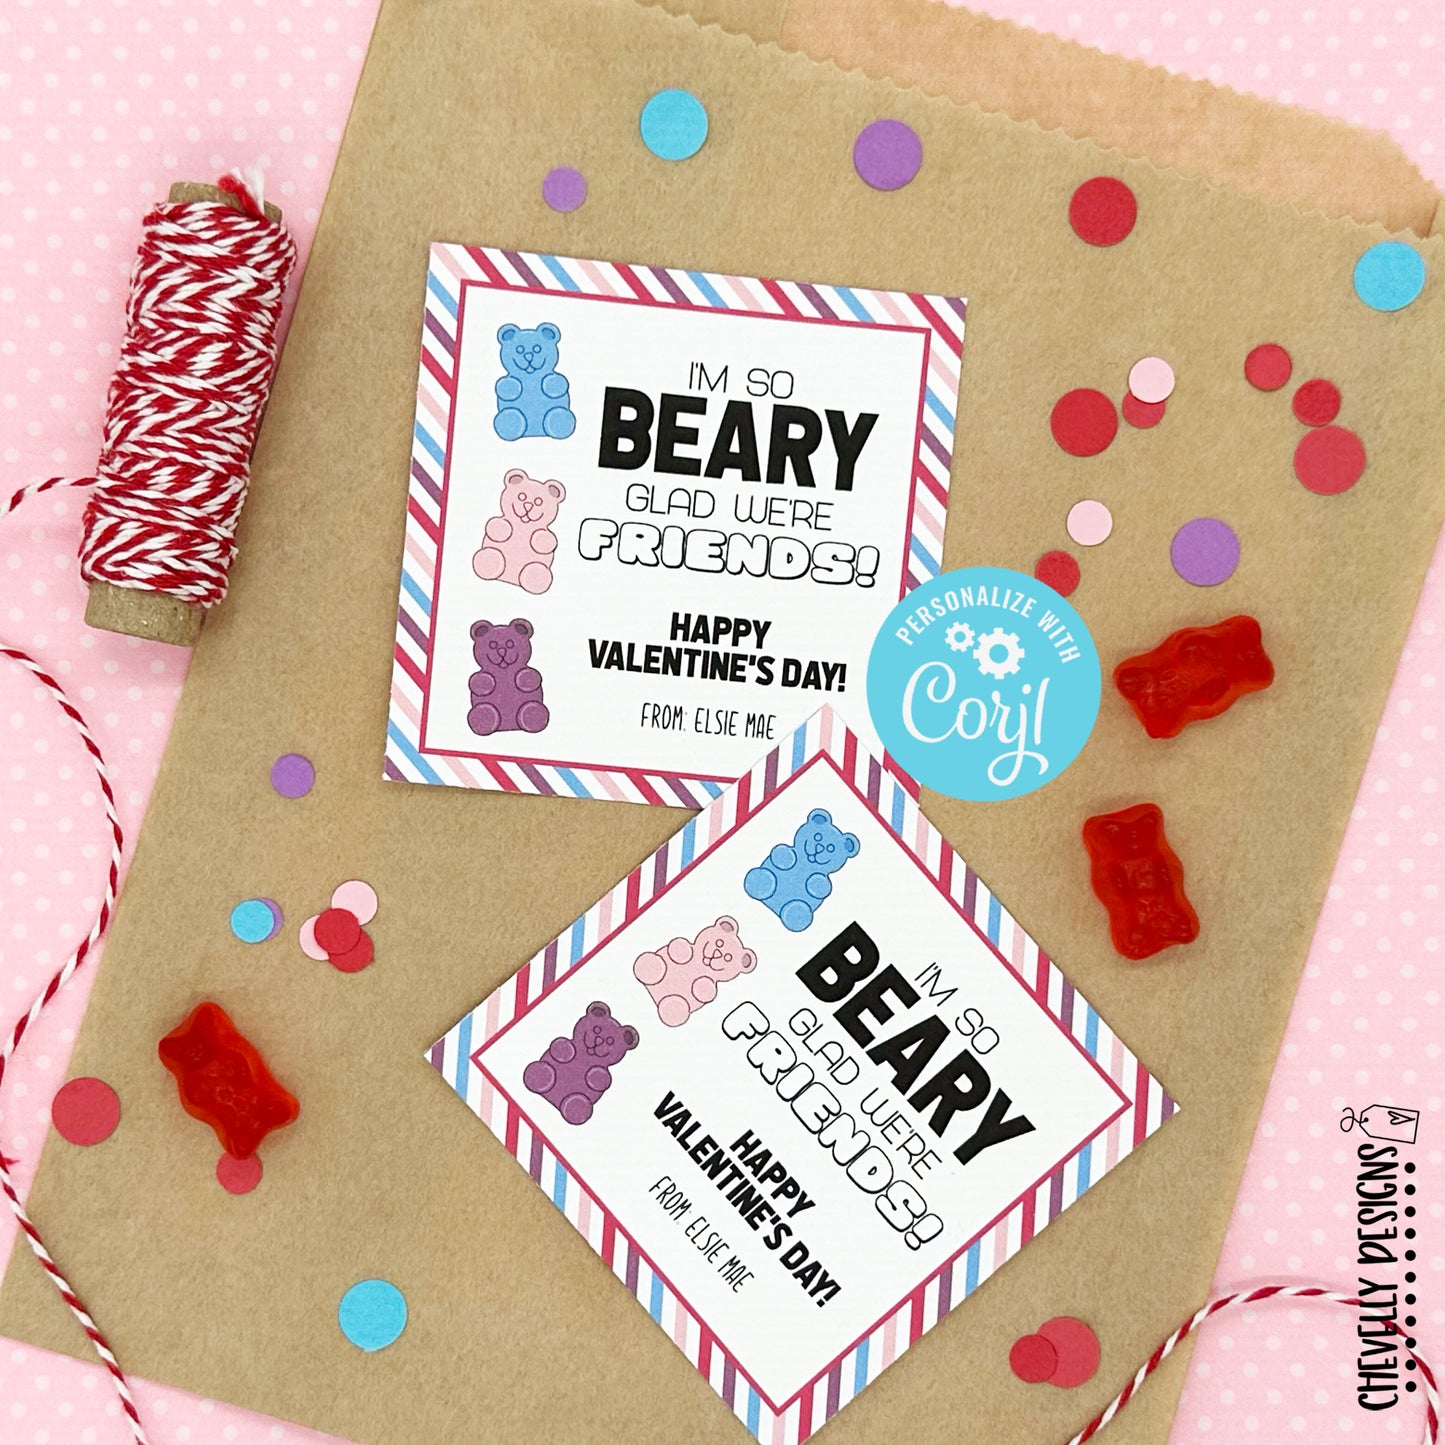 EDITABLE - I'm so Beary Glad We're Friends - Printable Class Valentine's Day Cards - Digital File